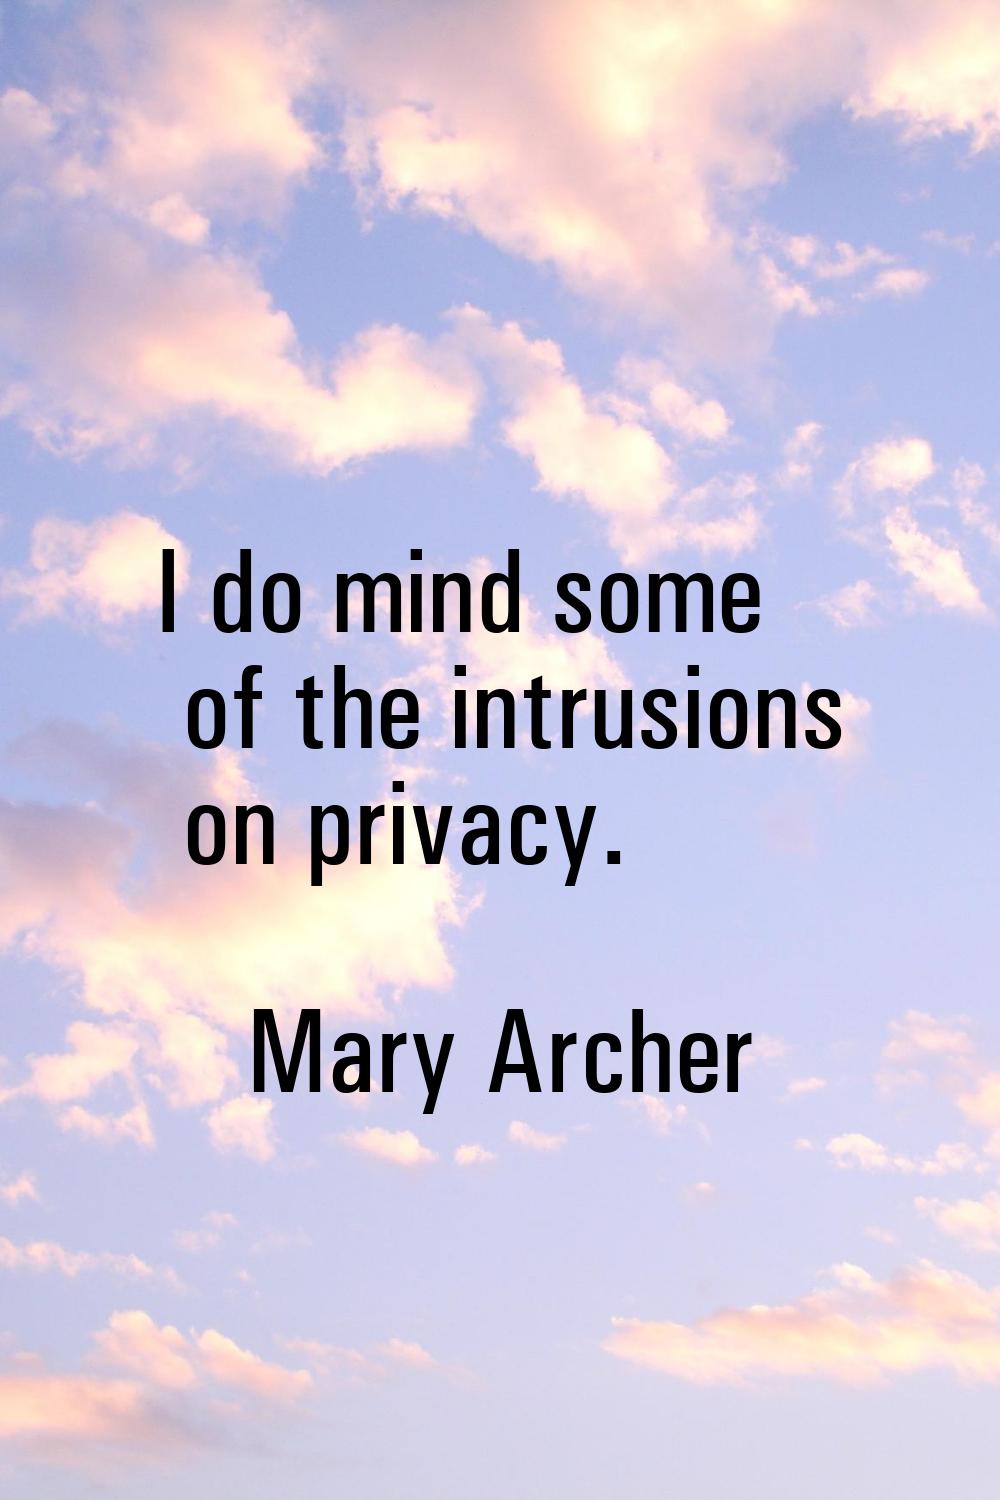 I do mind some of the intrusions on privacy.